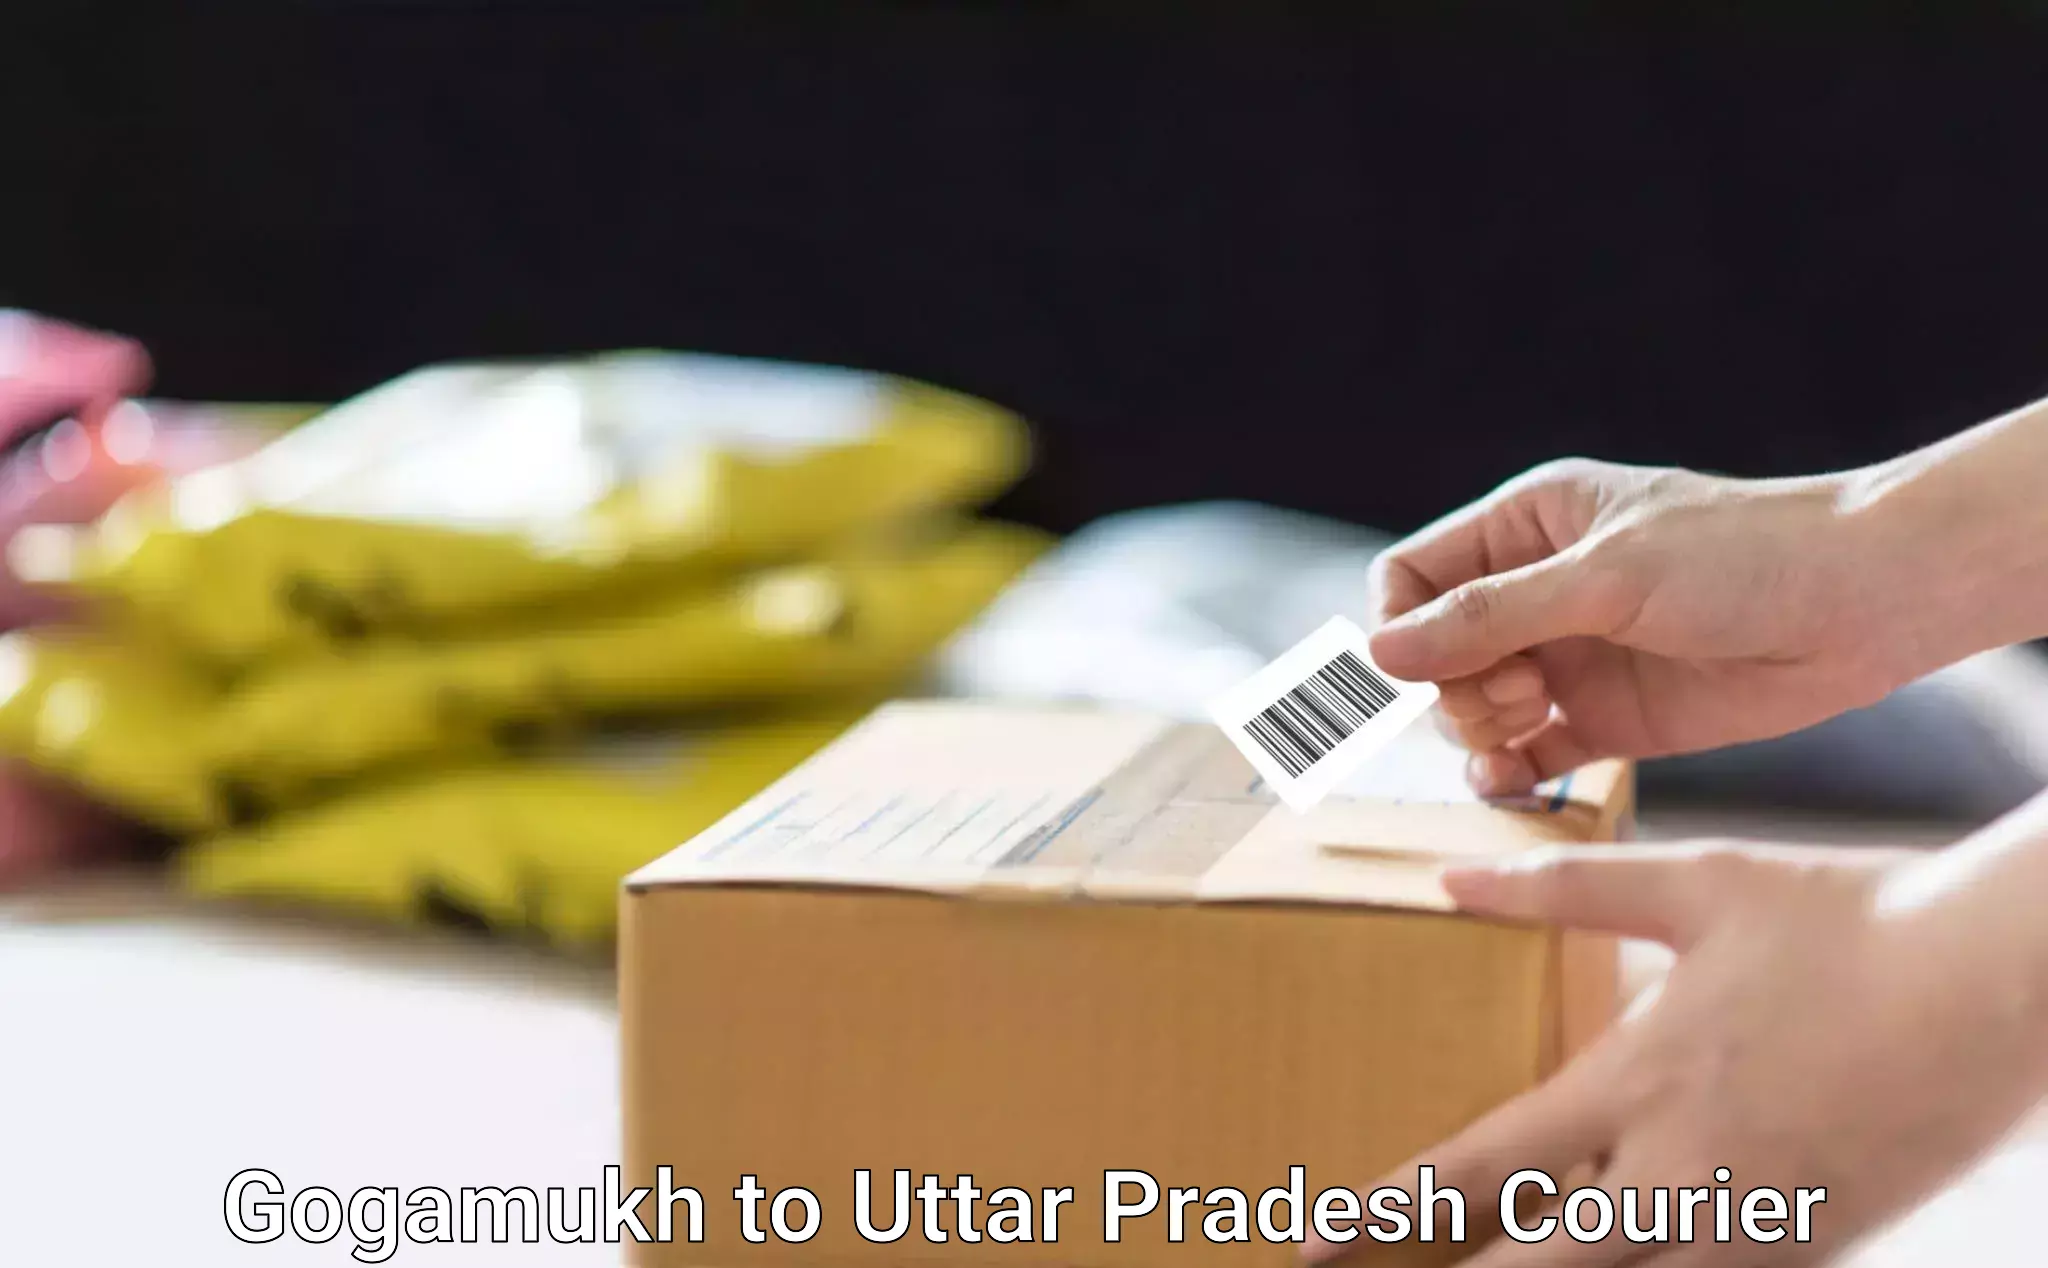 Bulk courier orders in Gogamukh to Ghaziabad